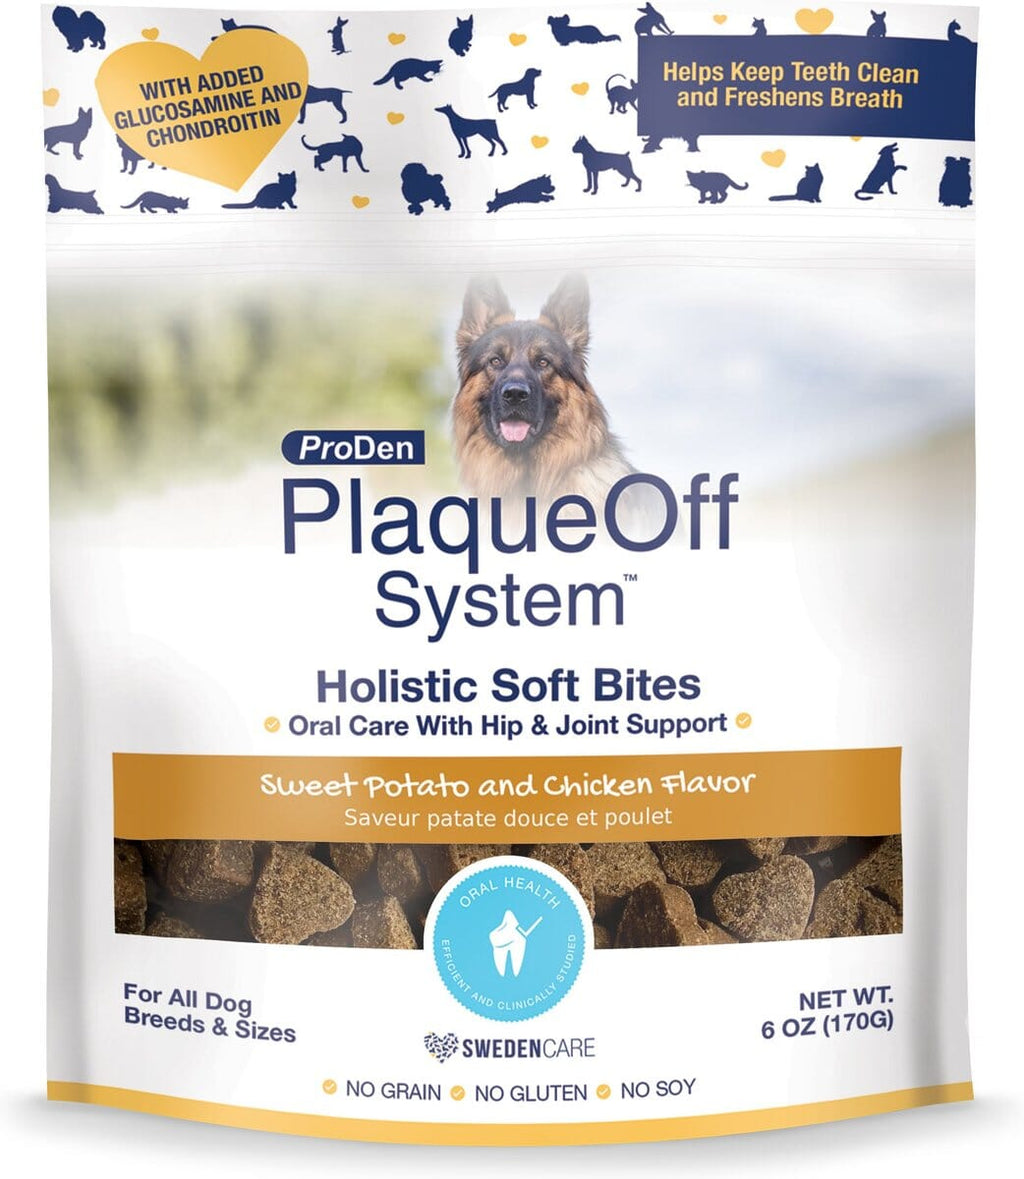 Proden Plaqueoff Oral Care with Hip and Joint Support Dental Dog Chews - 6 Oz  